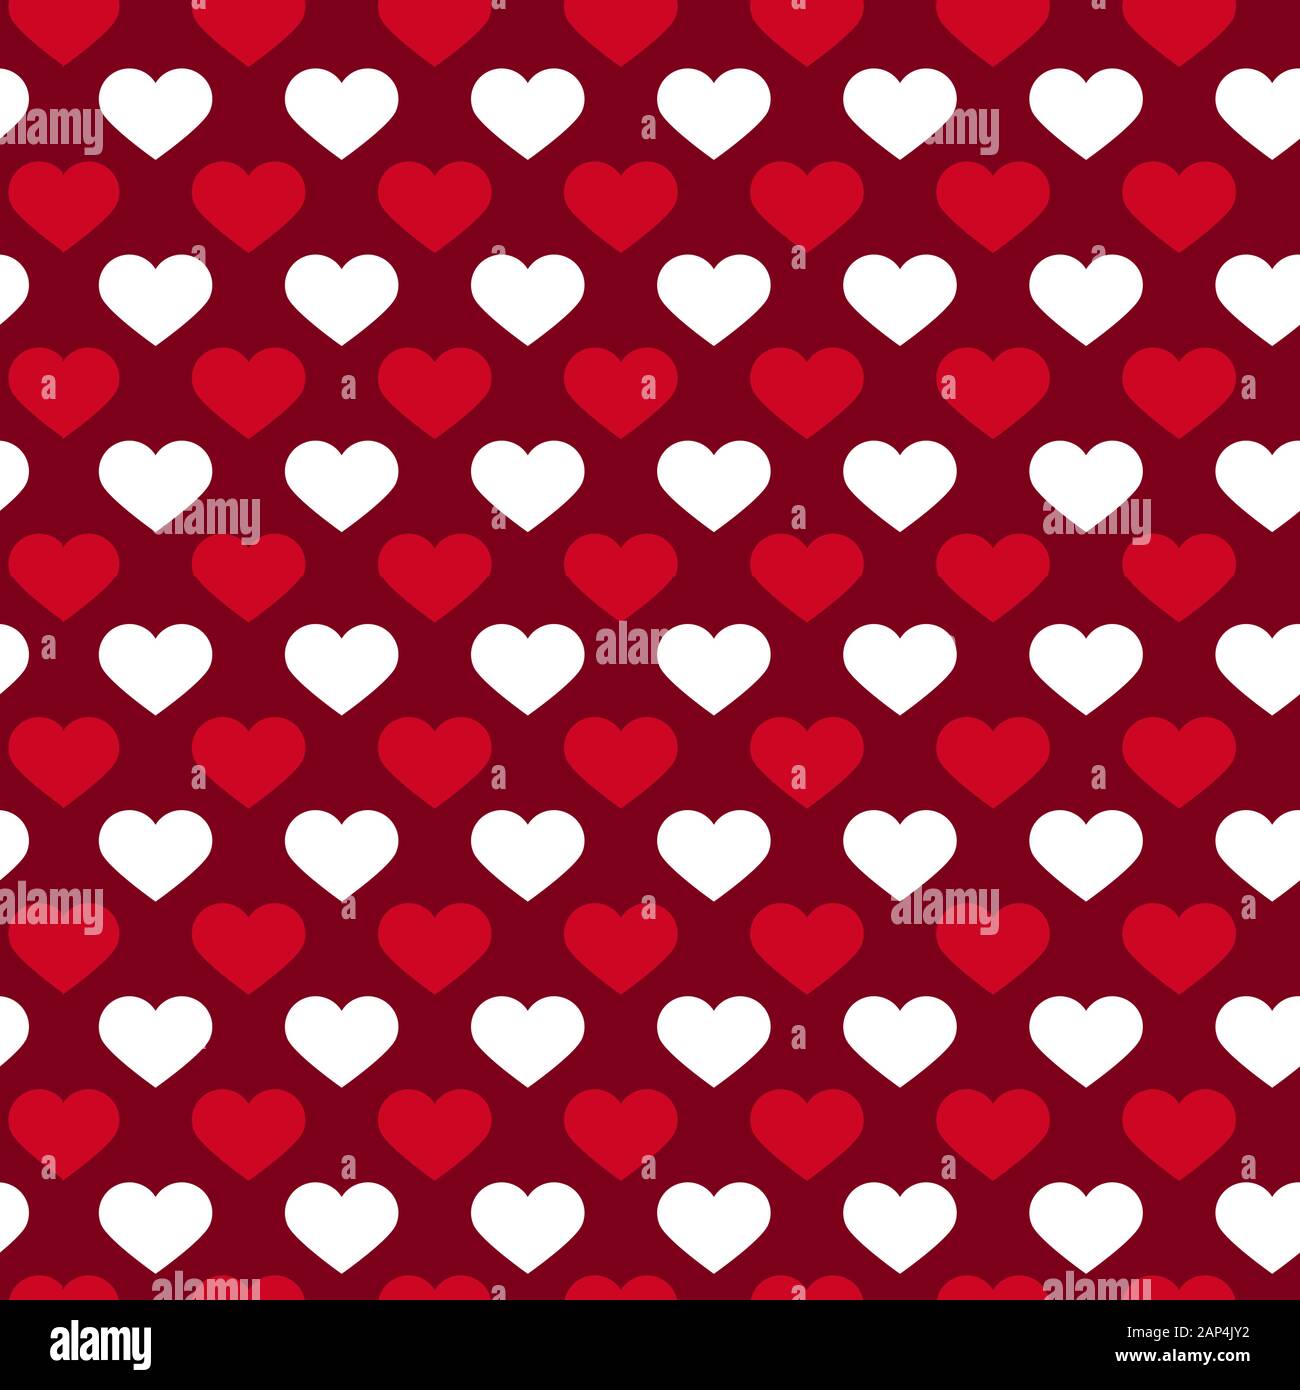 Seamless patterns with red and white hearts, polka dots. background with hearts. Valentine's Day. Gift wrap, print, cloth, cute background for a card Stock Photo